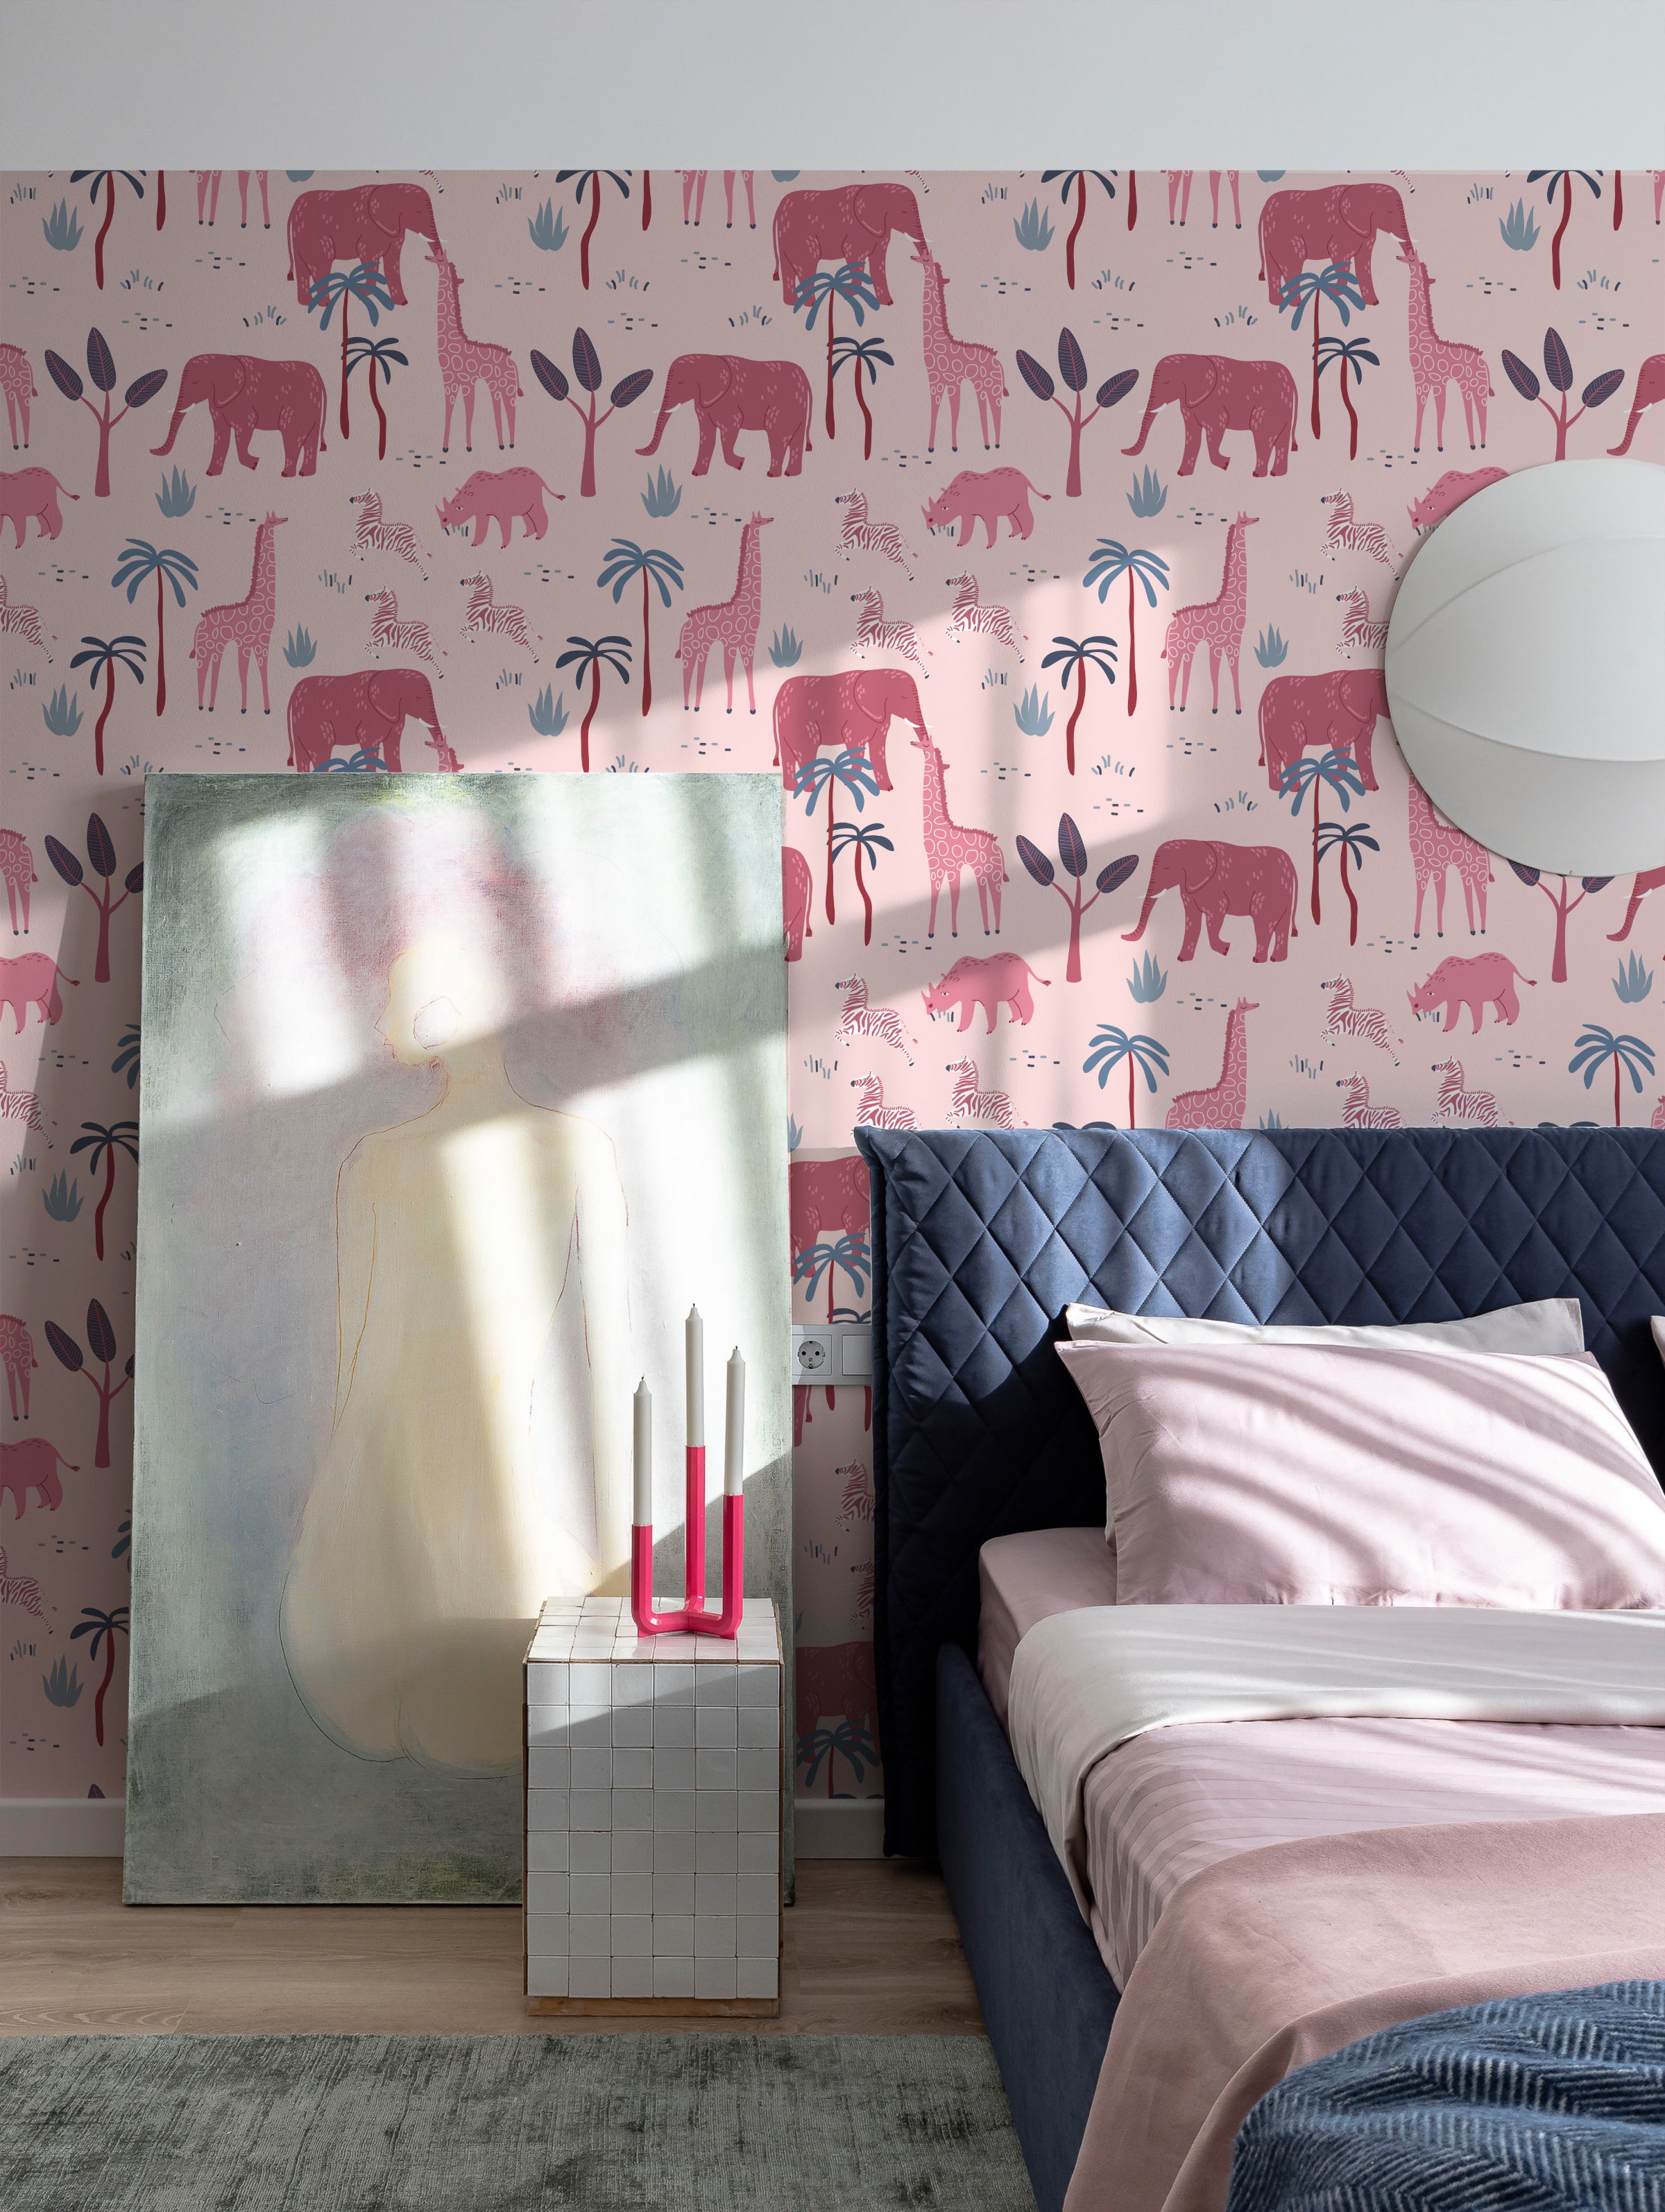 A modern bedroom featuring pink safari-themed wallpaper with elephants, giraffes, and zebras. The room has a dark blue quilted headboard and a minimalist nightstand with pink and white decor.